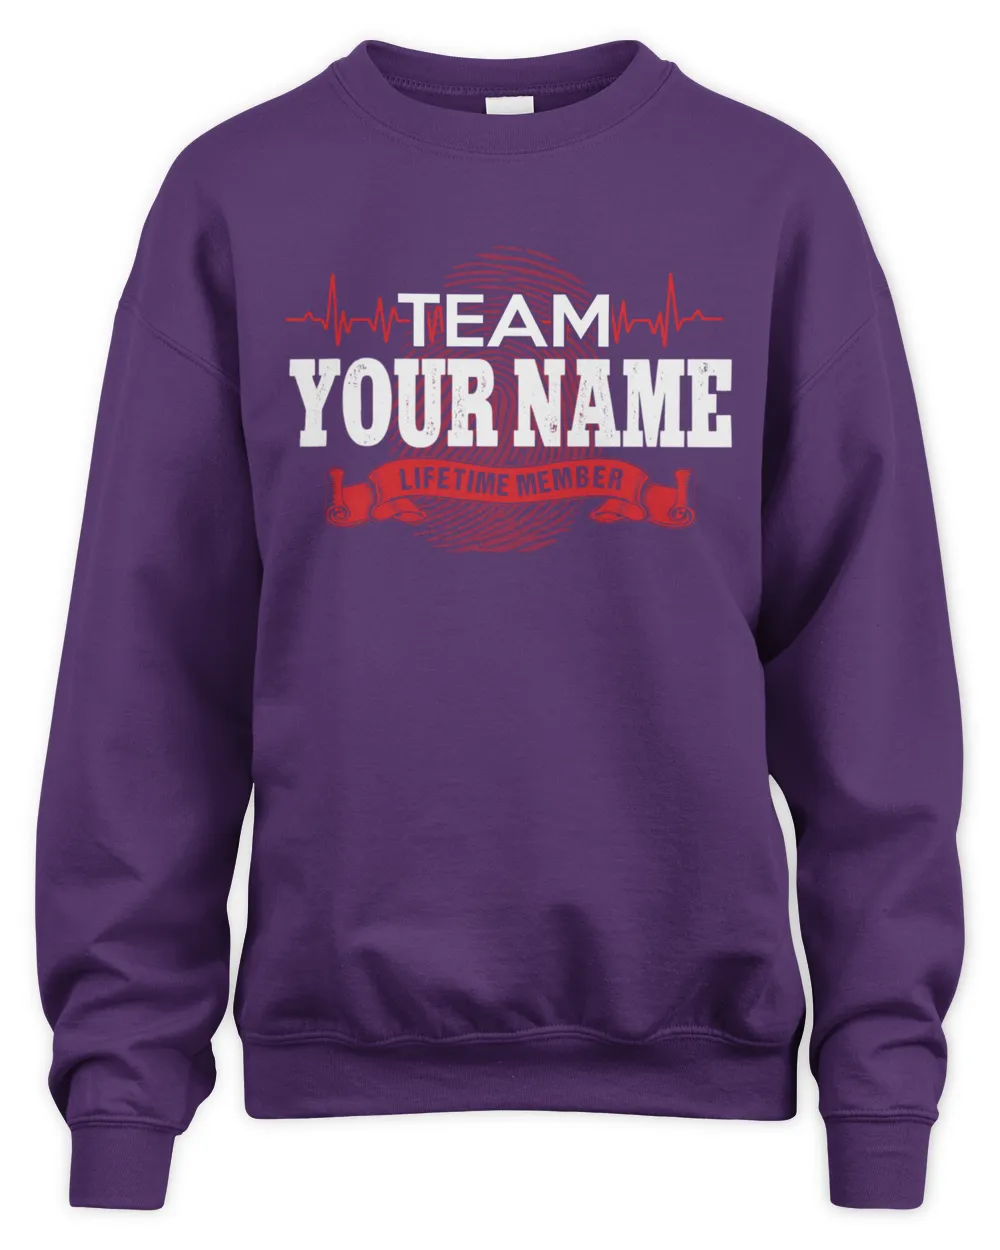 Team Your Name ! Lifetime member ! personalize  t-shirt